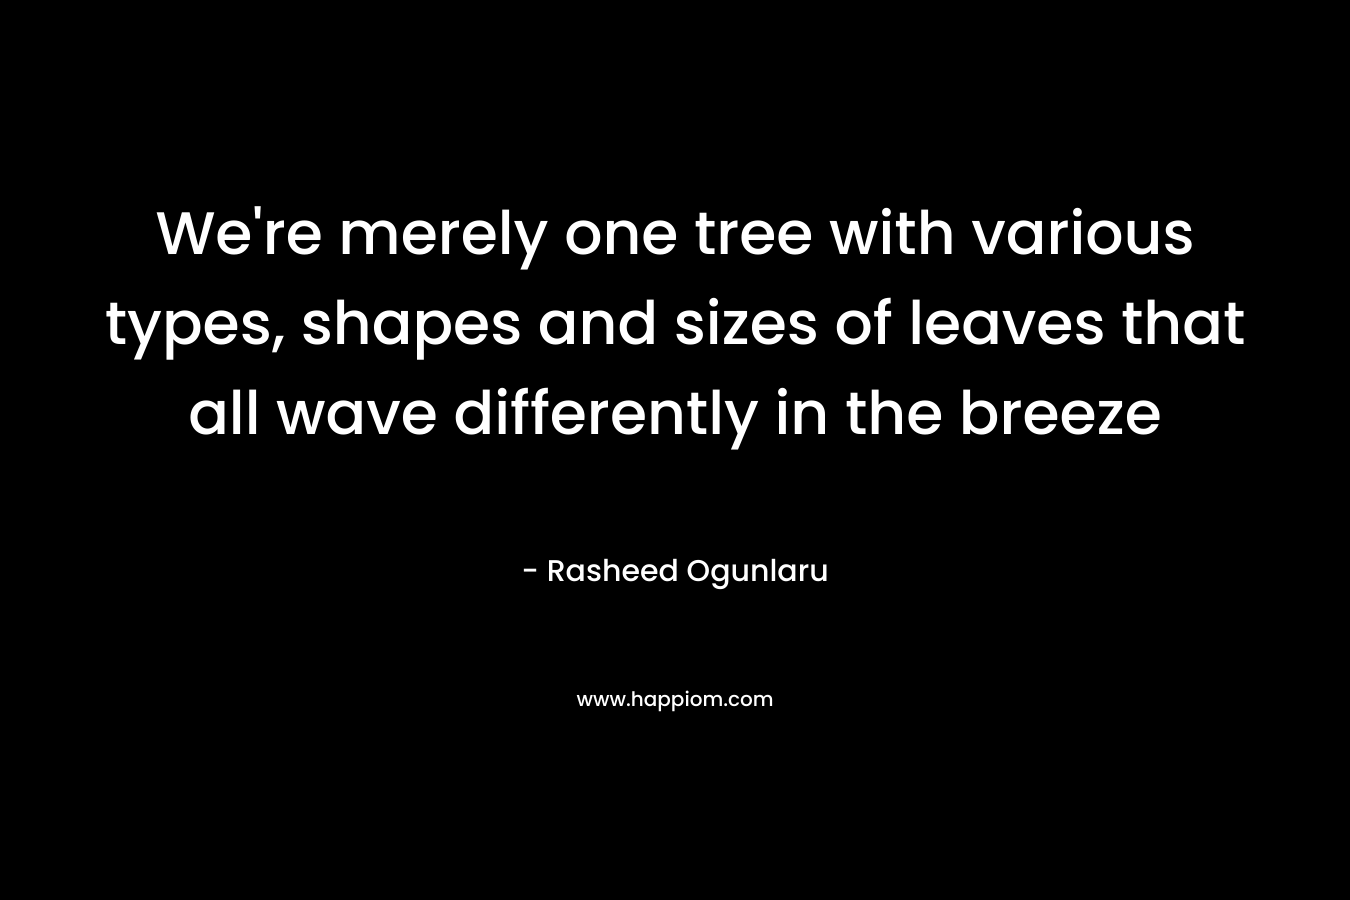 We're merely one tree with various types, shapes and sizes of leaves that all wave differently in the breeze